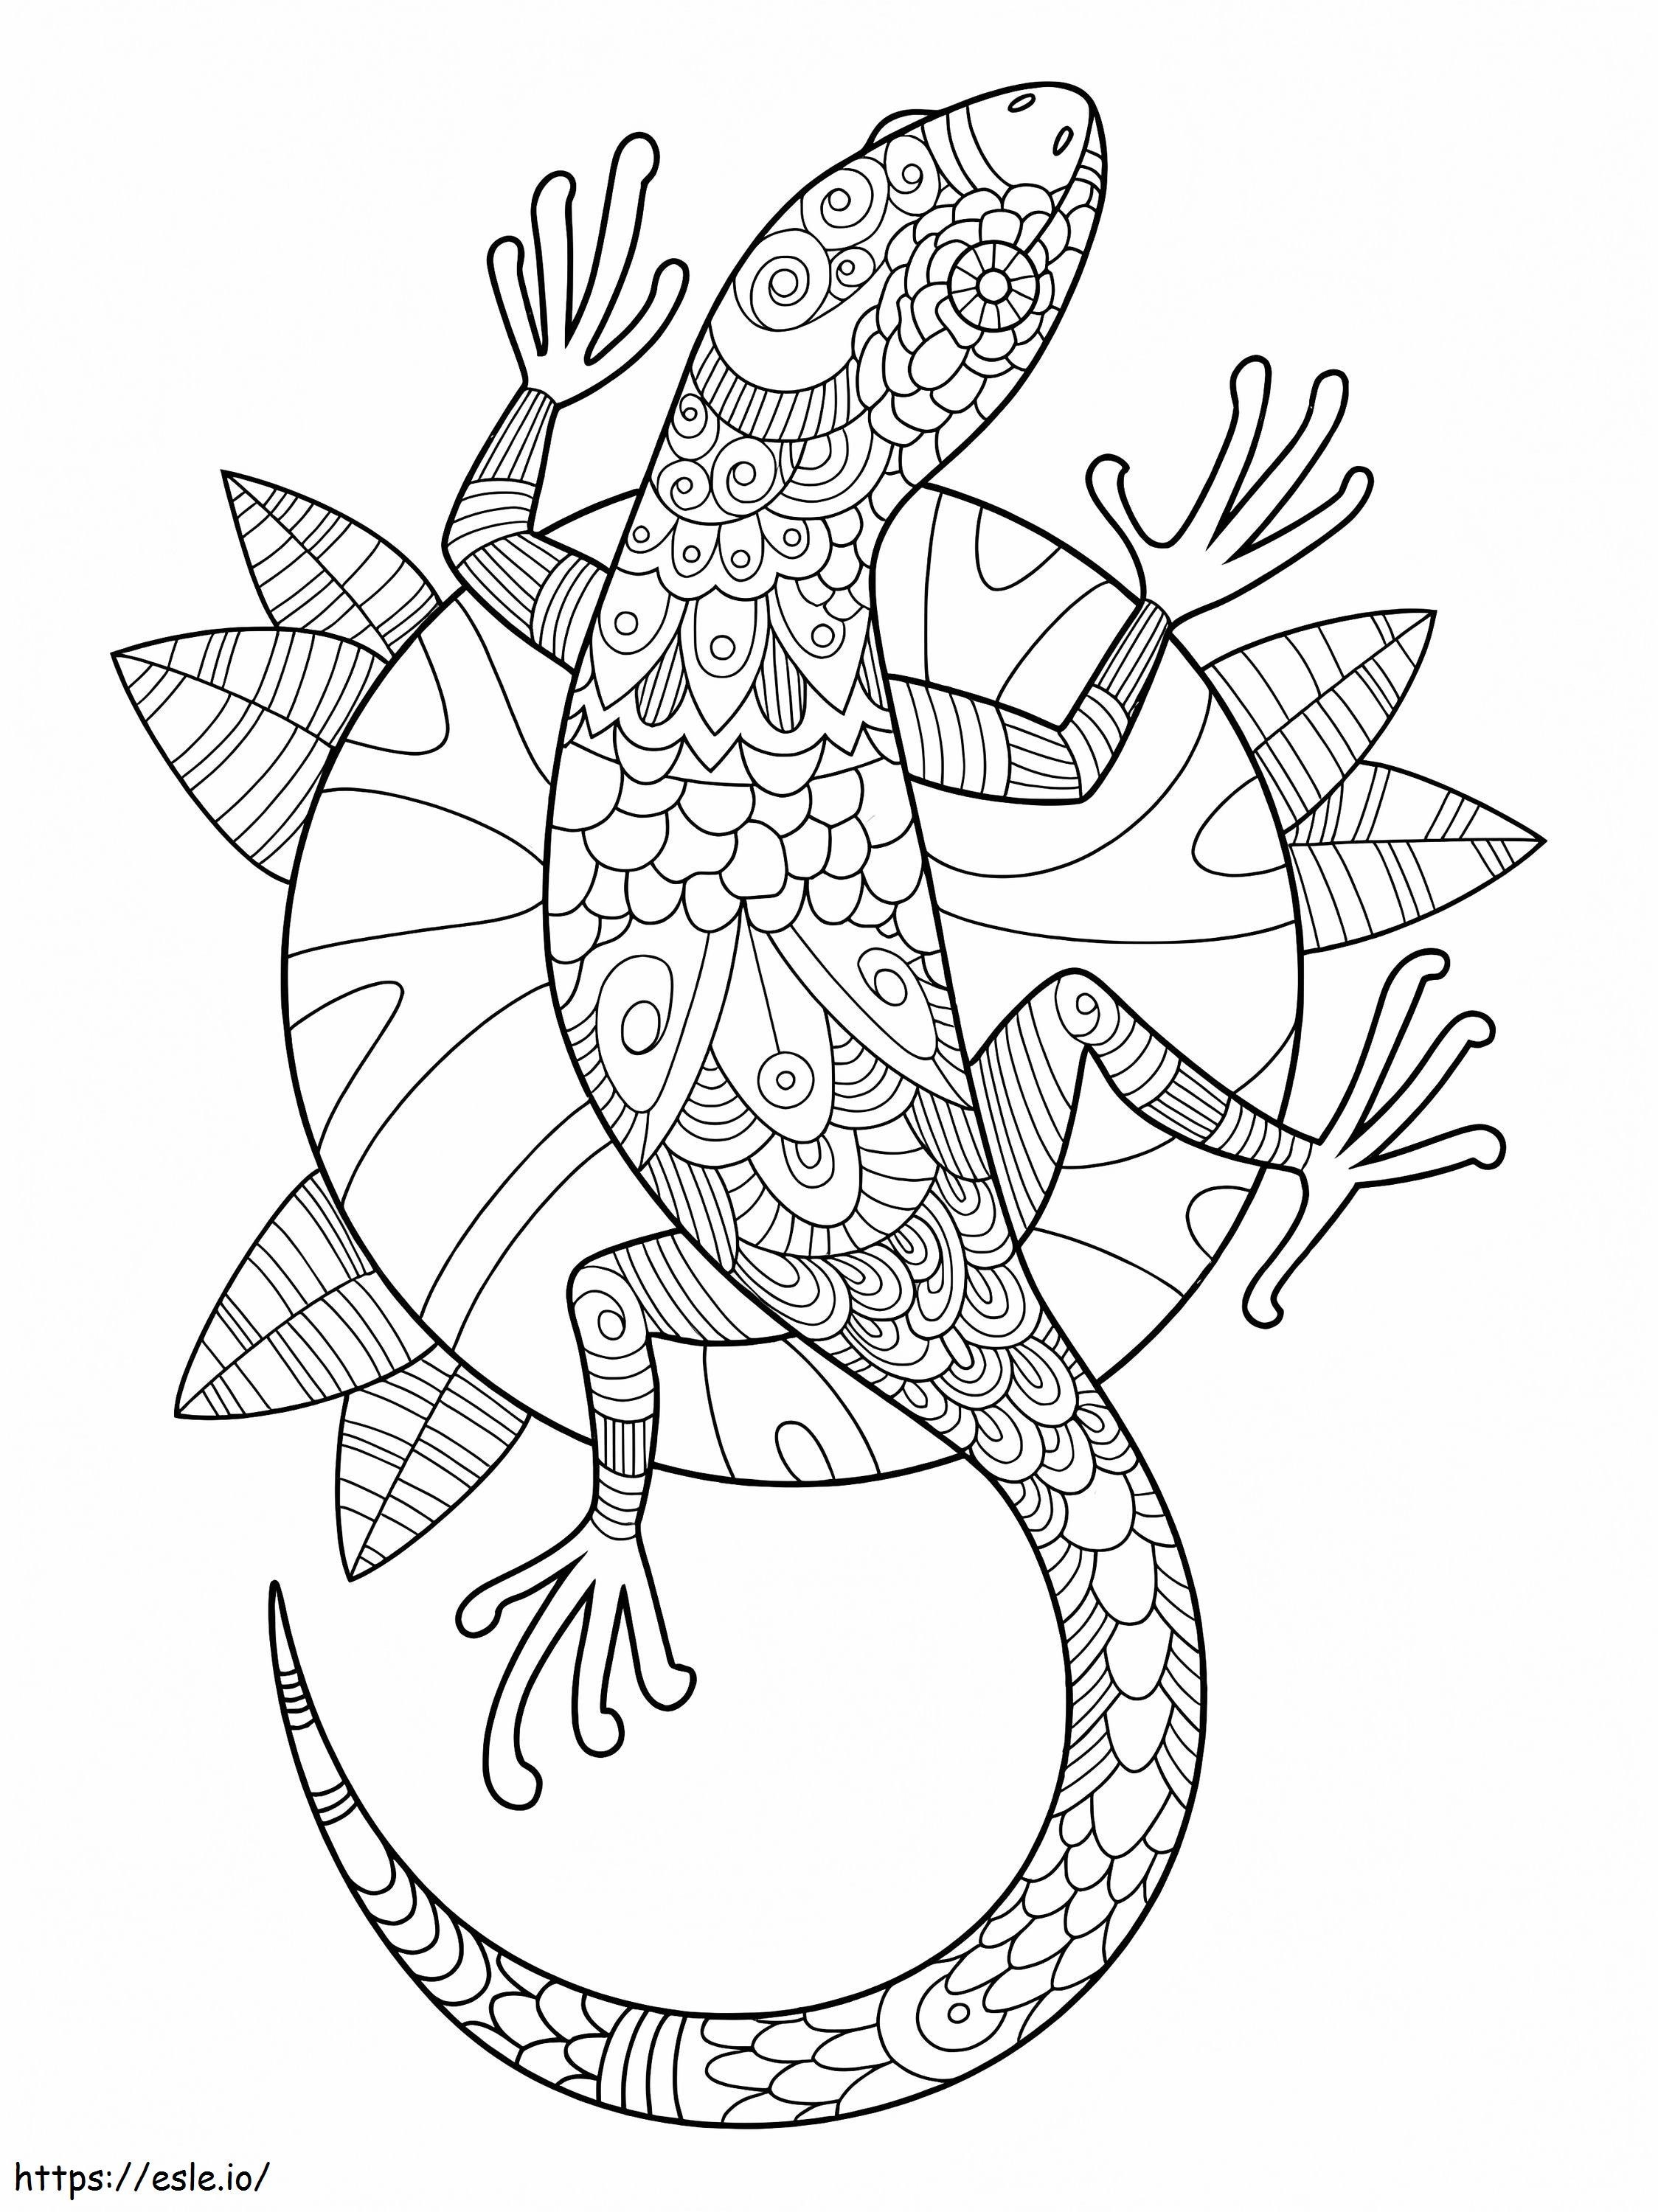 Hard Lizard 1 coloring page